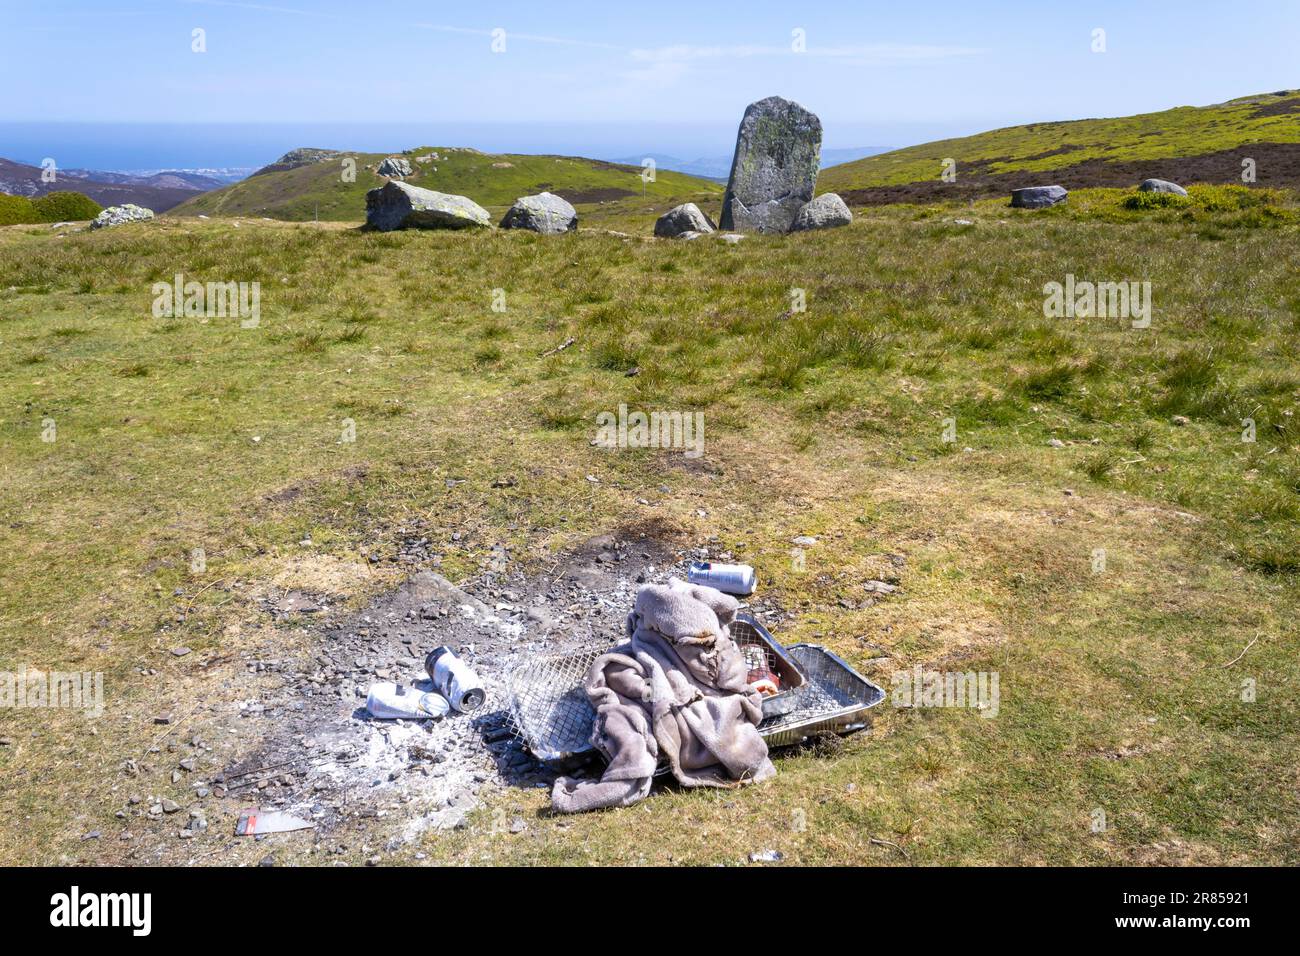 Barbeque litter at The Druid's Circle, or Meini Hirion in Welsh, above the village of Penmaenmawr, Gwynedd, Wales, UK. Stock Photo